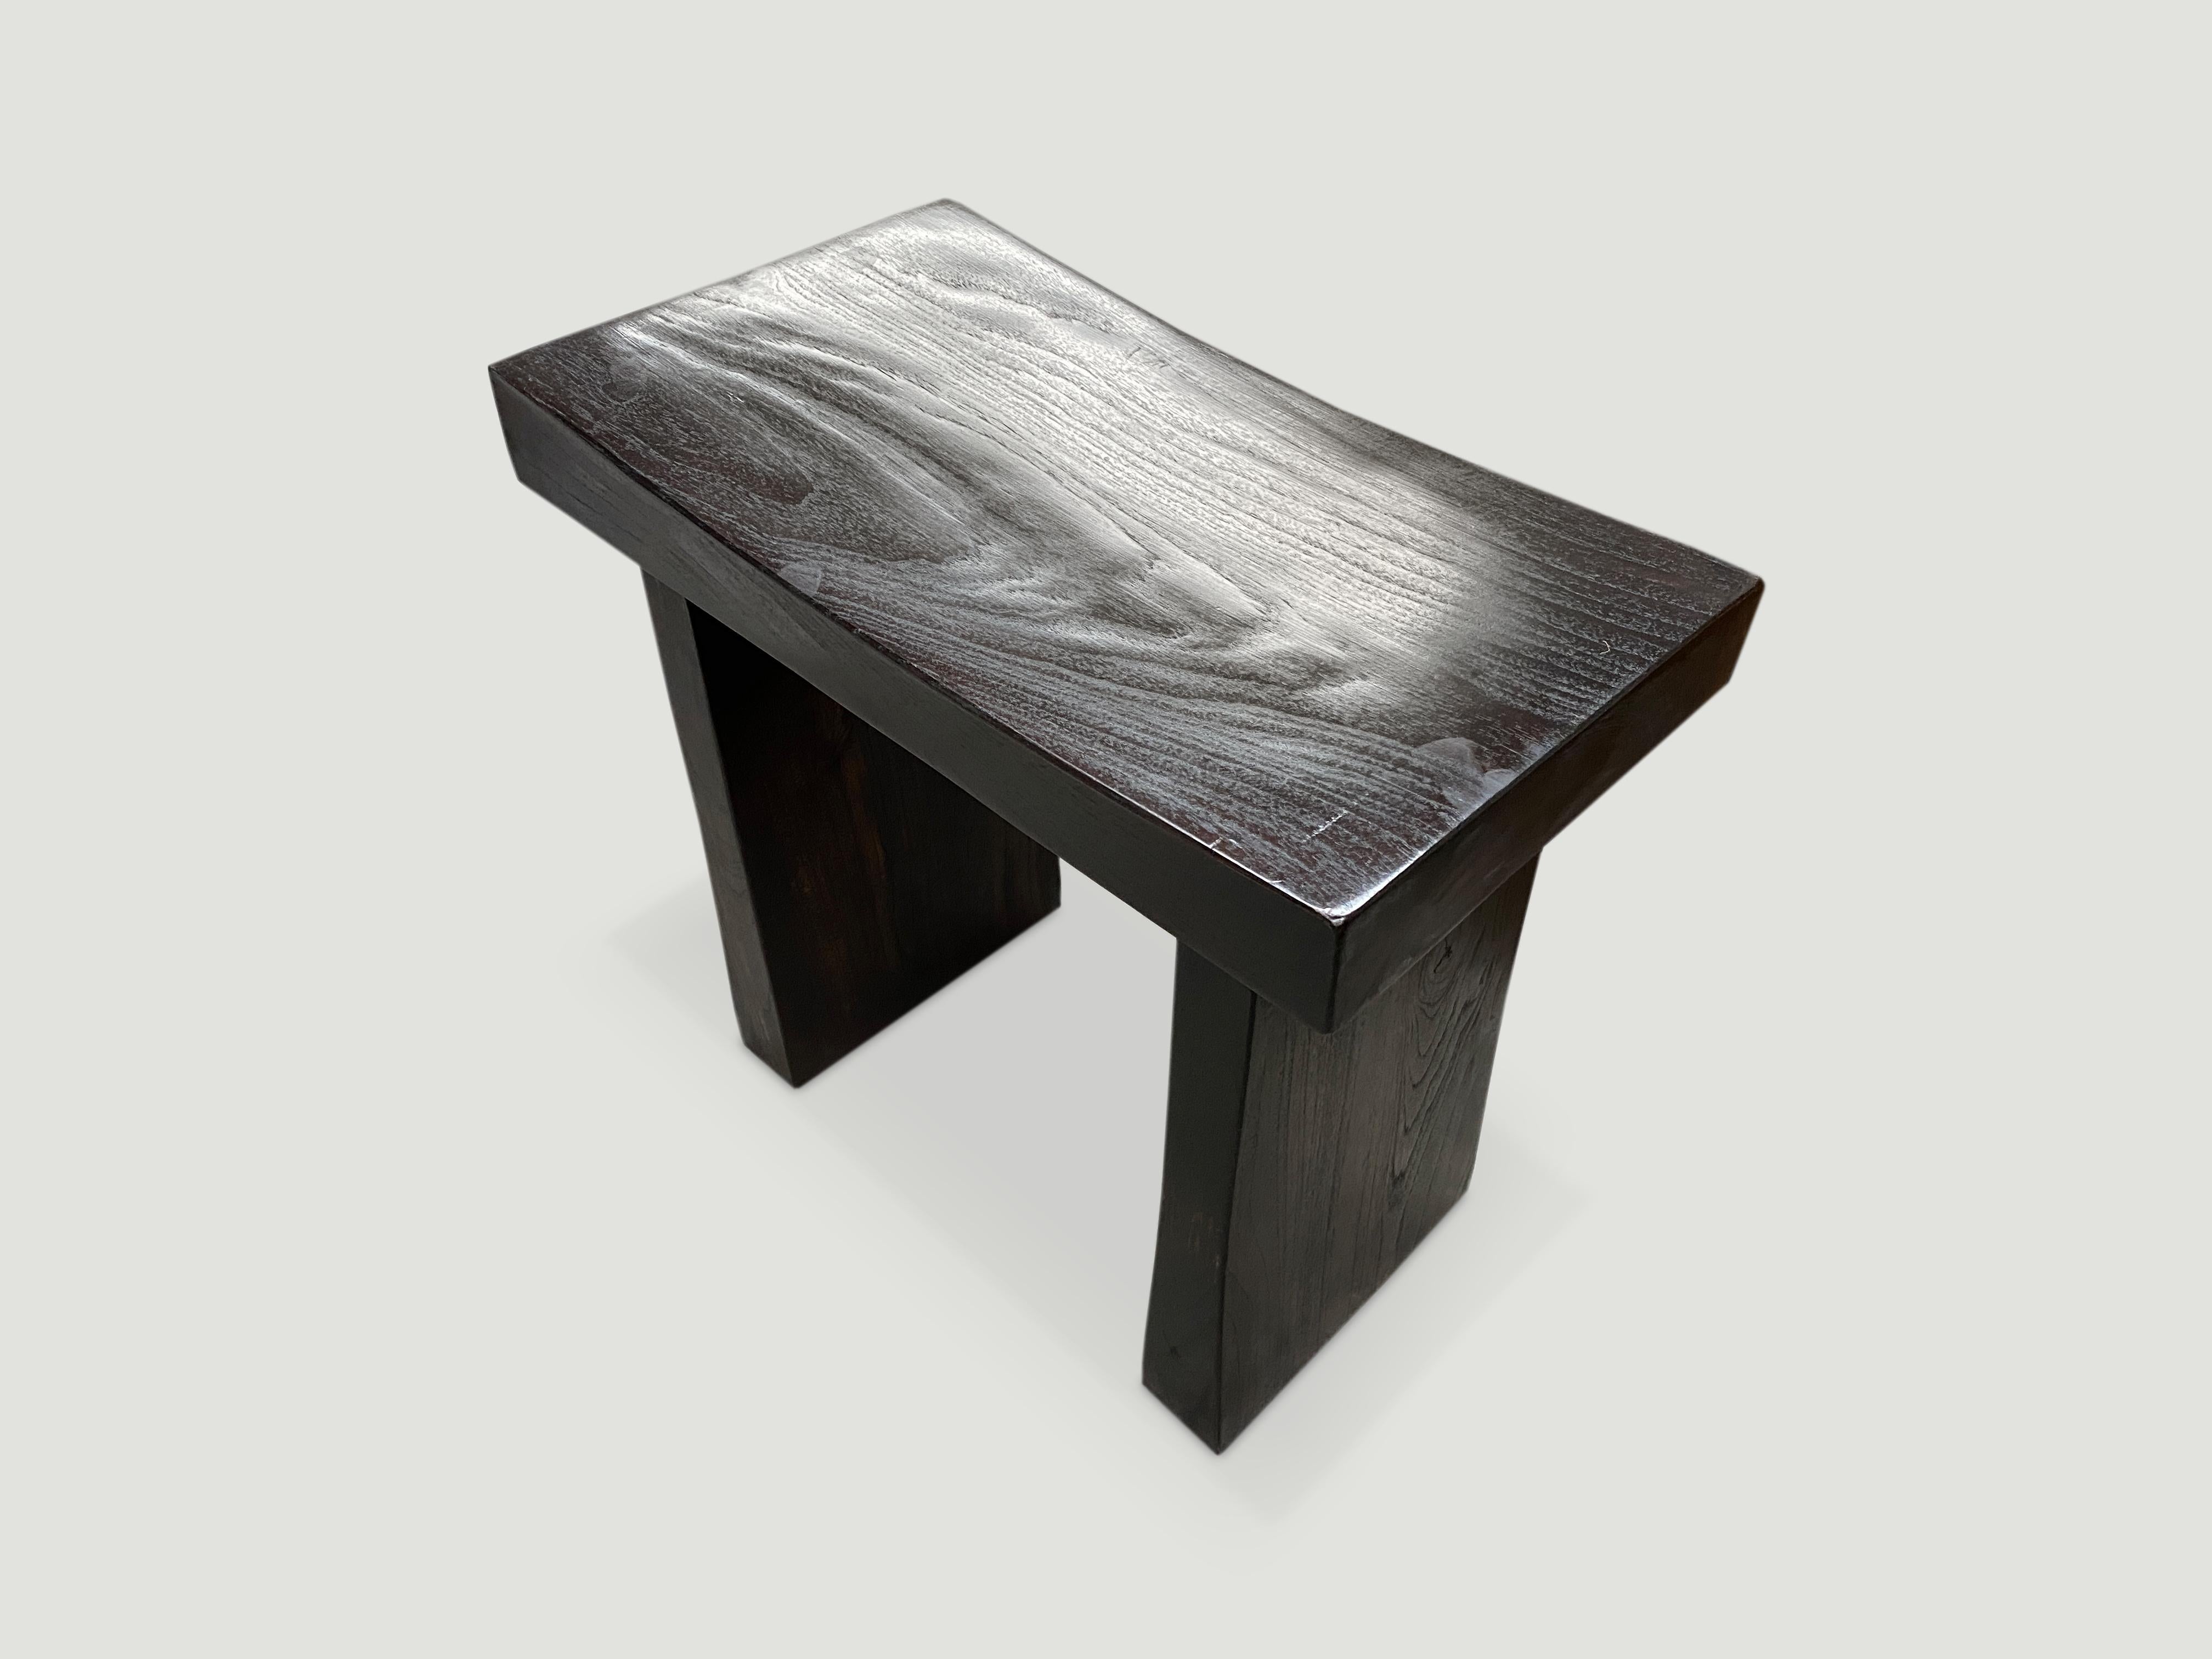 Sleek minimalist bench. Hand made from a thick single slab of reclaimed teak and finished with an espresso stain revealing the grain of the wood. Custom sizes and stains available. Please inquire.

Own an Andrianna Shamaris original.

Andrianna